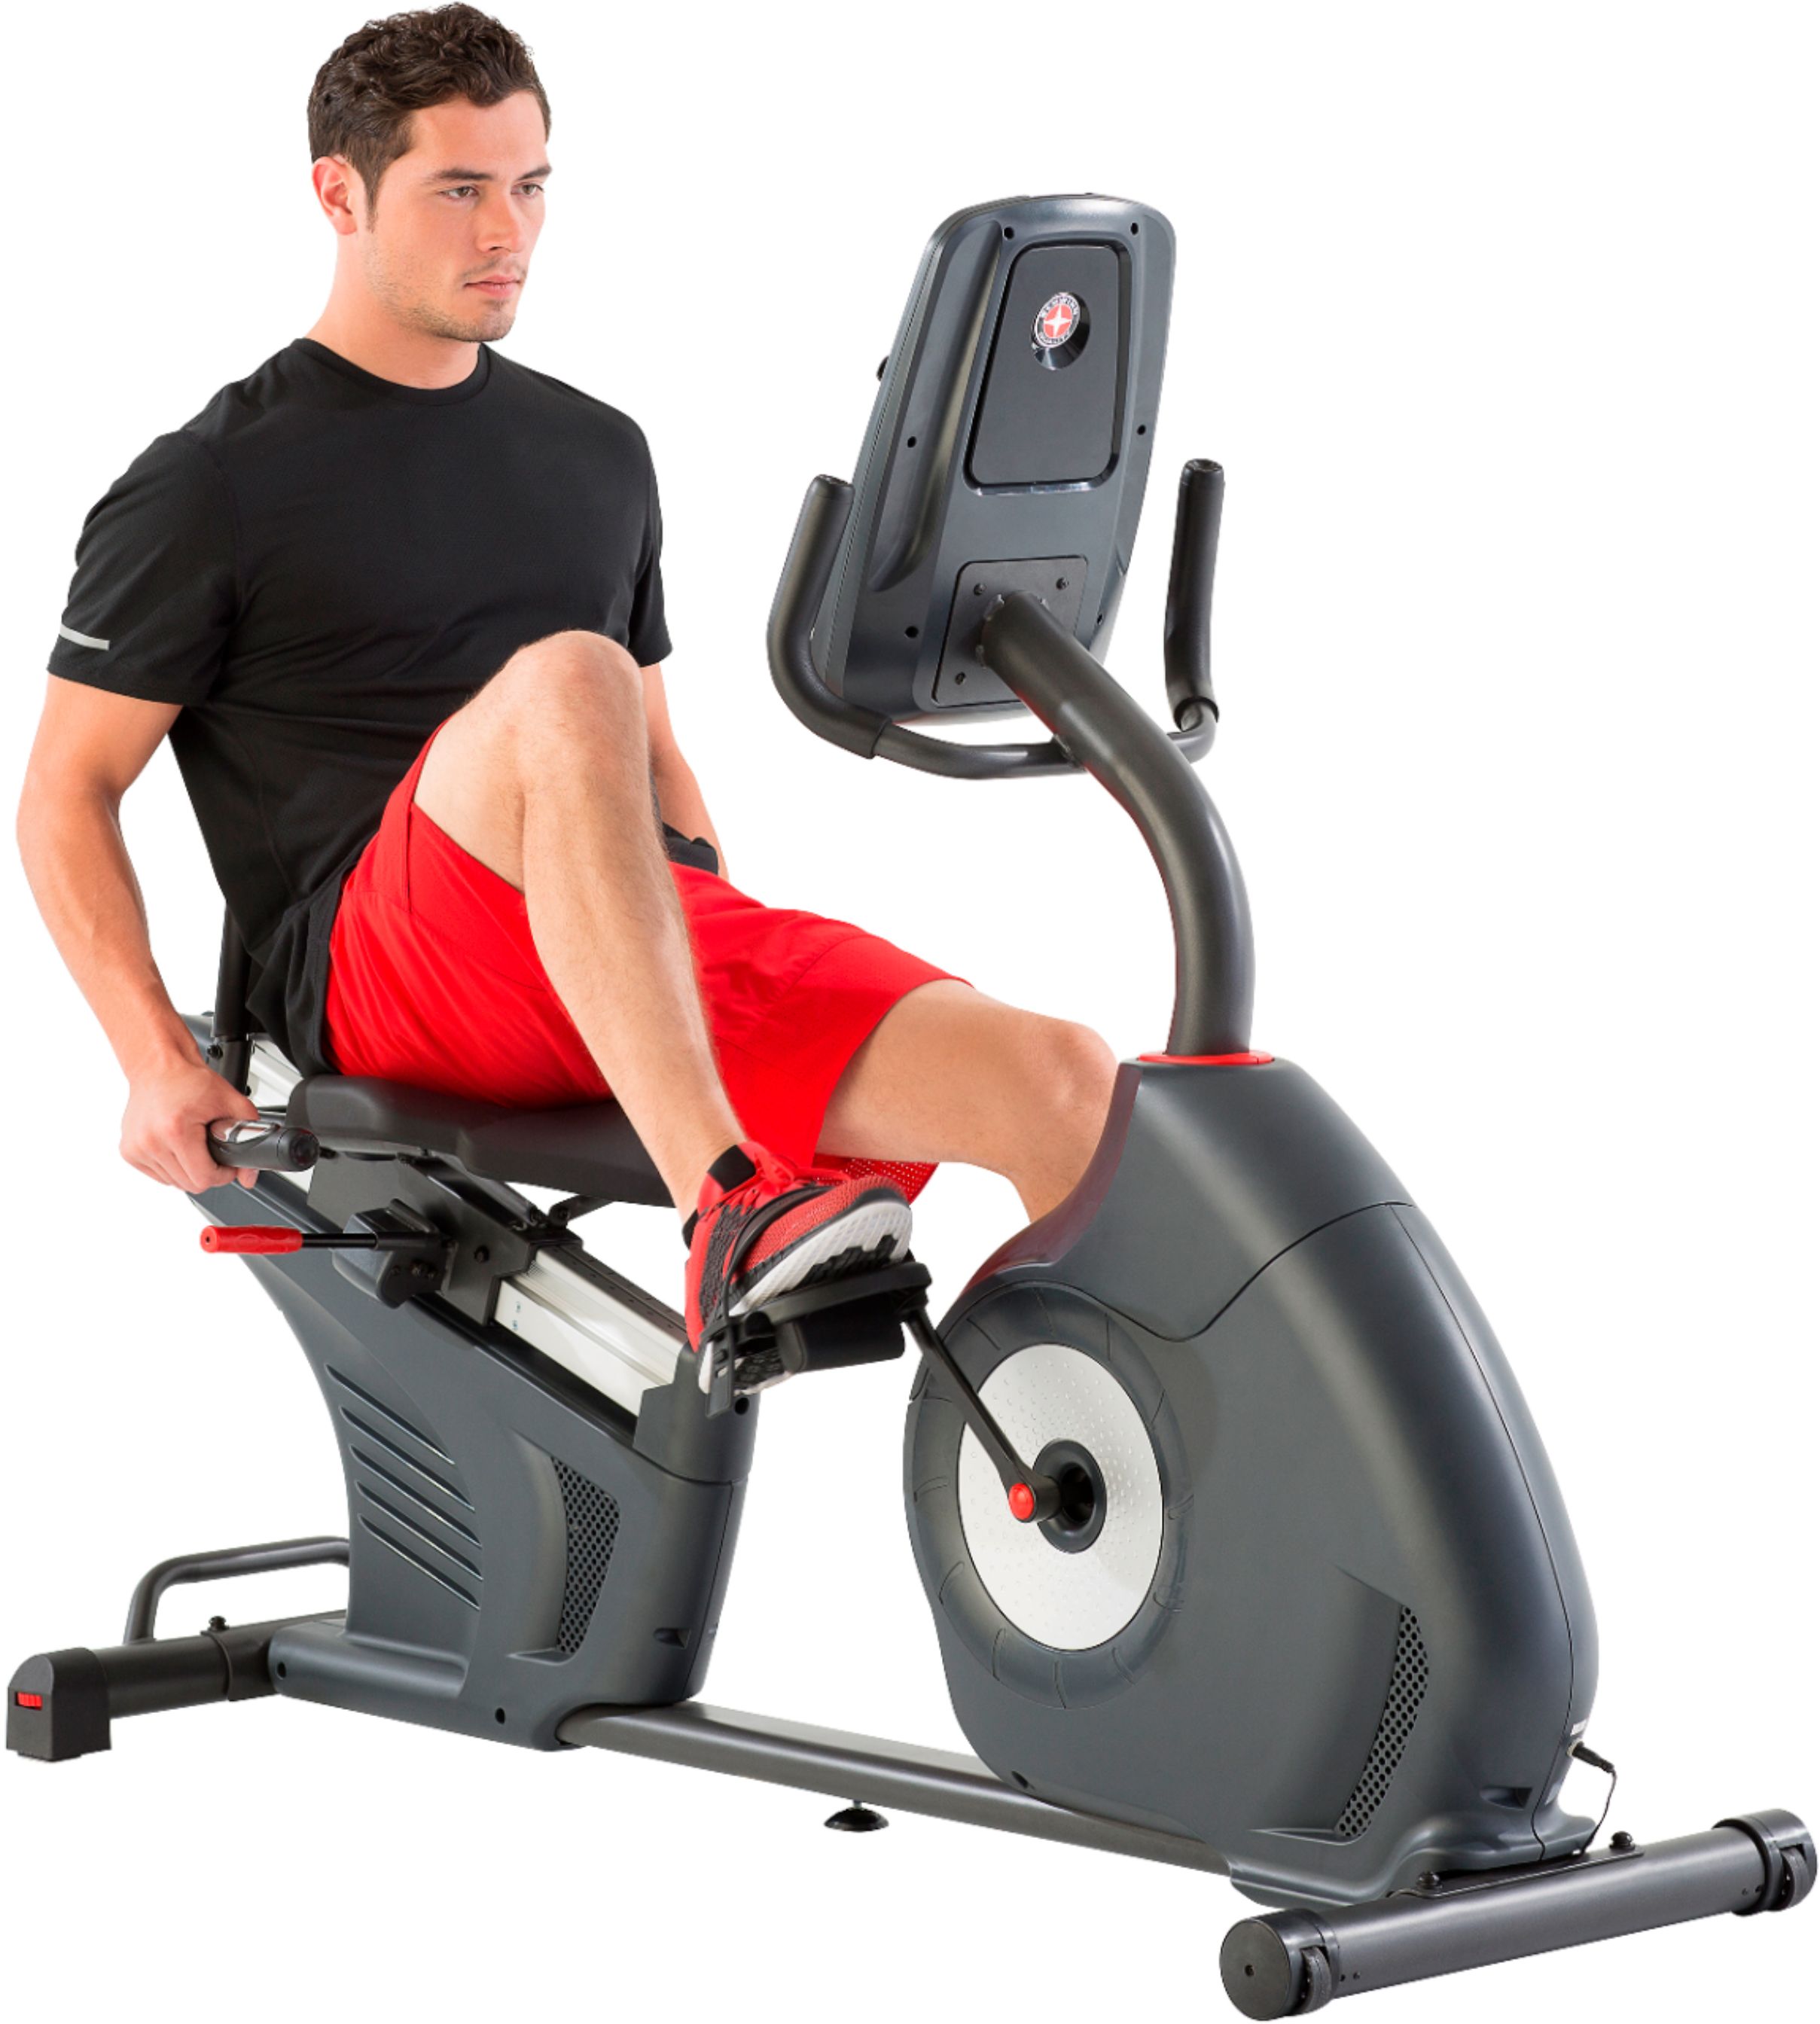 Questions and Answers: Schwinn 270 Recumbent Exercise Bike Black 100515 ...